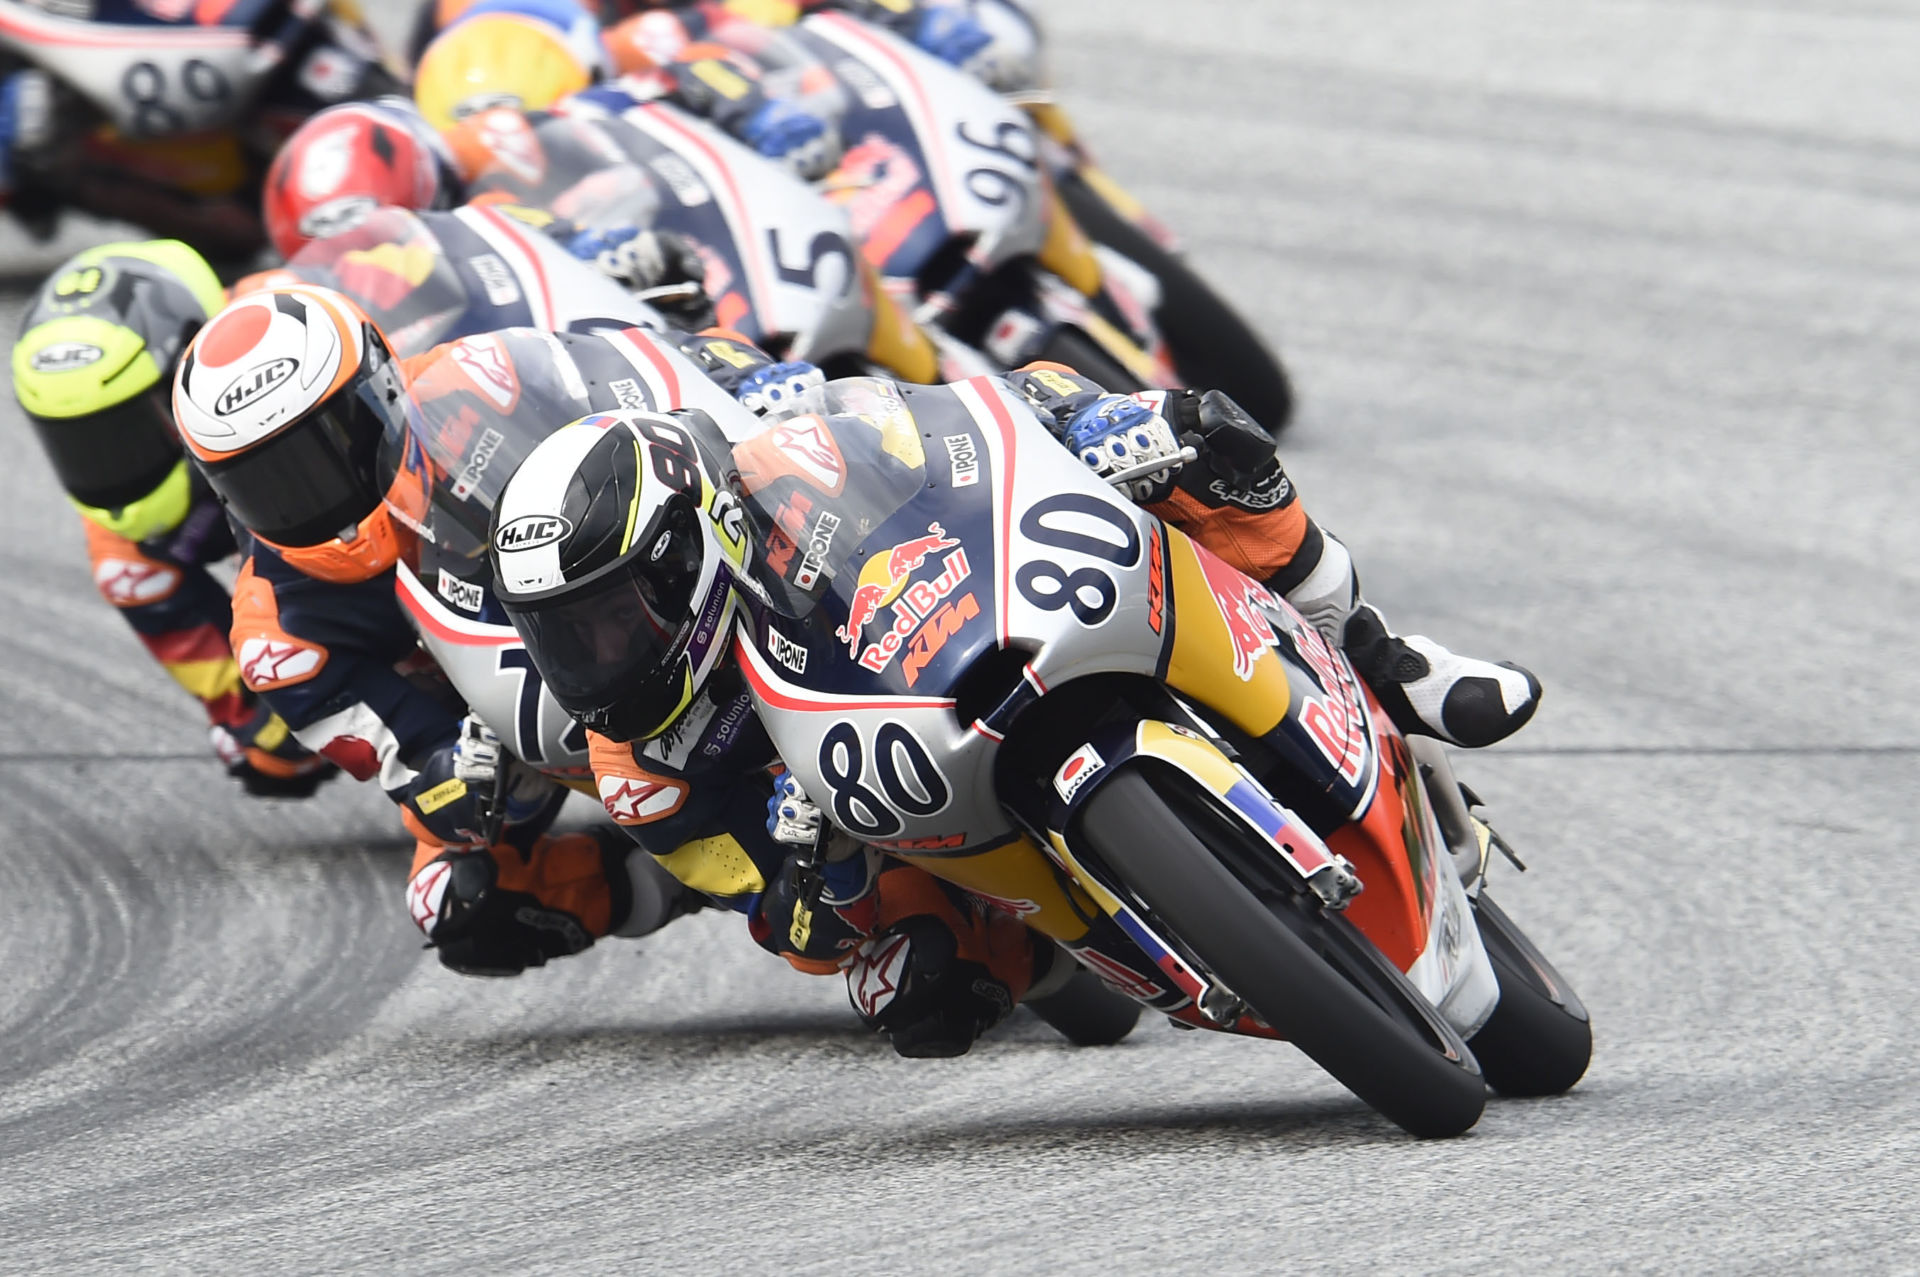 David Alonso (80) leading Red Bull MotoGP Rookies Cup Race Two in Austria. Photo courtesy Red Bull.